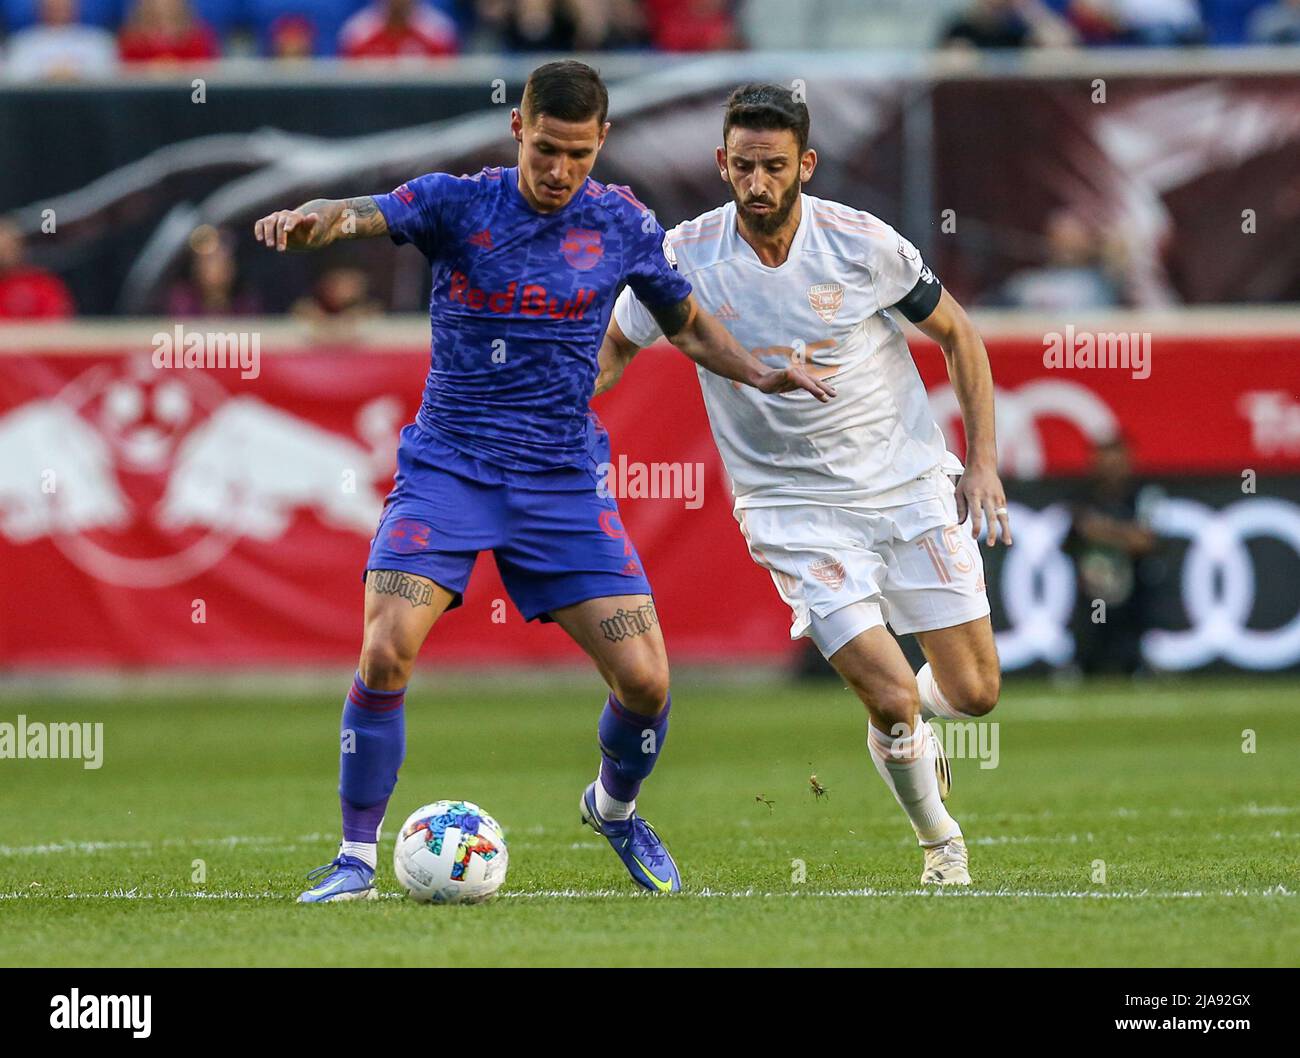 May 28, 2022: New York Red Bulls forward Patryk Klimala (9) and D.C. United forward Nigel Robertha (19) race to the ball during a MLS game between DC United and the New York Red Bulls at Red Bull Arena in Harrison, NJ. The Red Bulls defeated DC United 4-1. Mike Langish/Cal Sport Media. Stock Photo